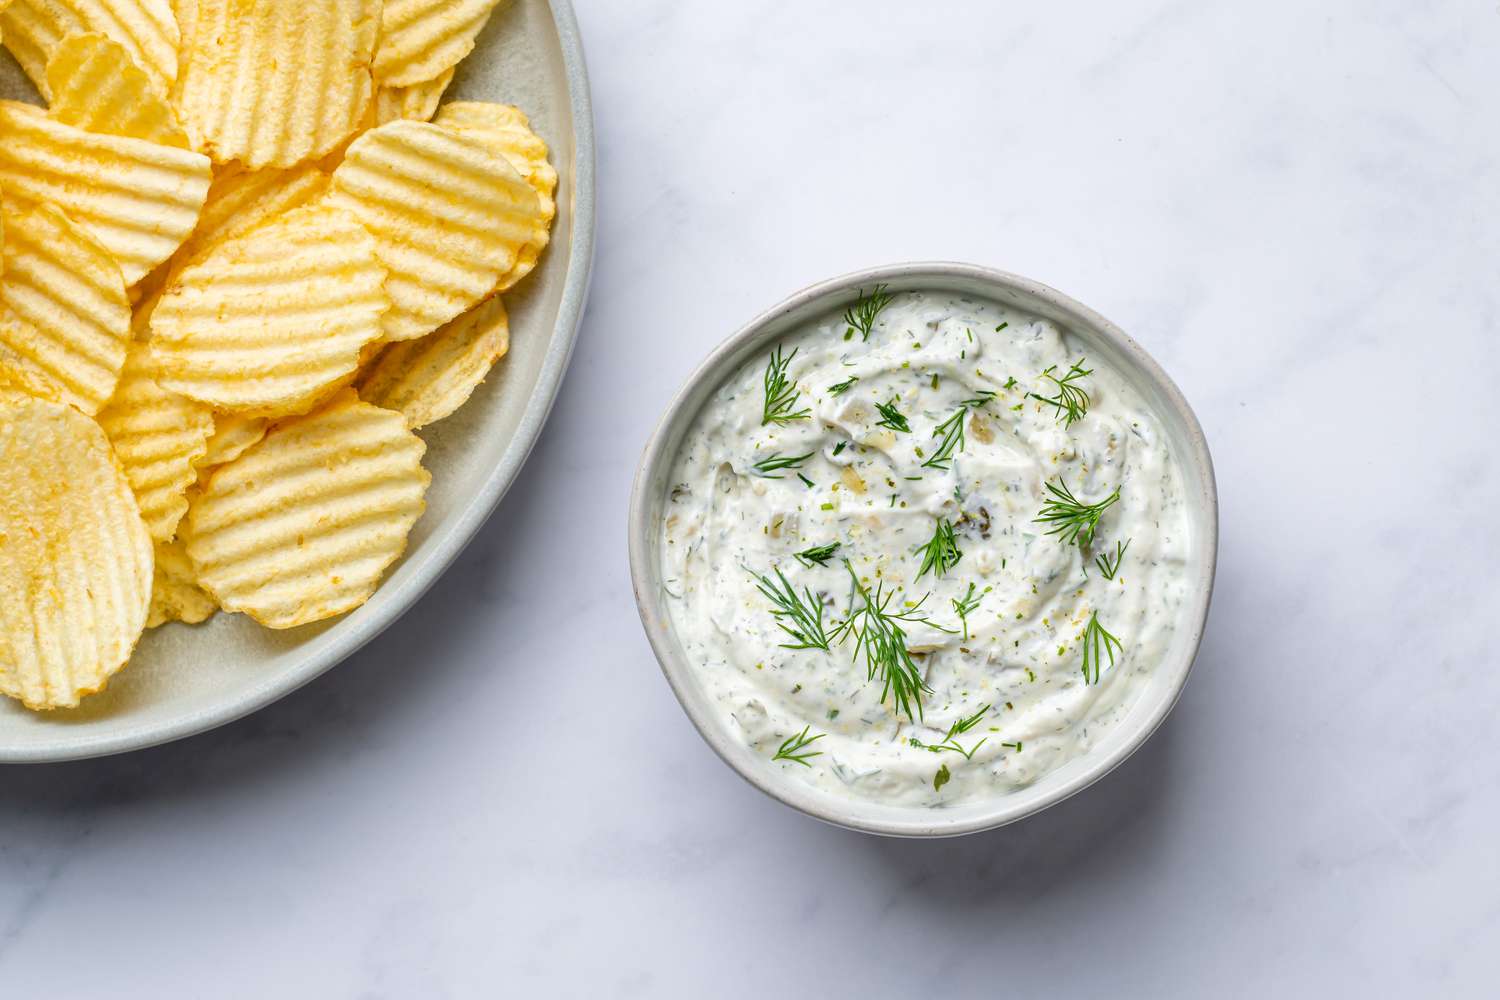 dill pickle dip in a bowl with ruffle potato chips